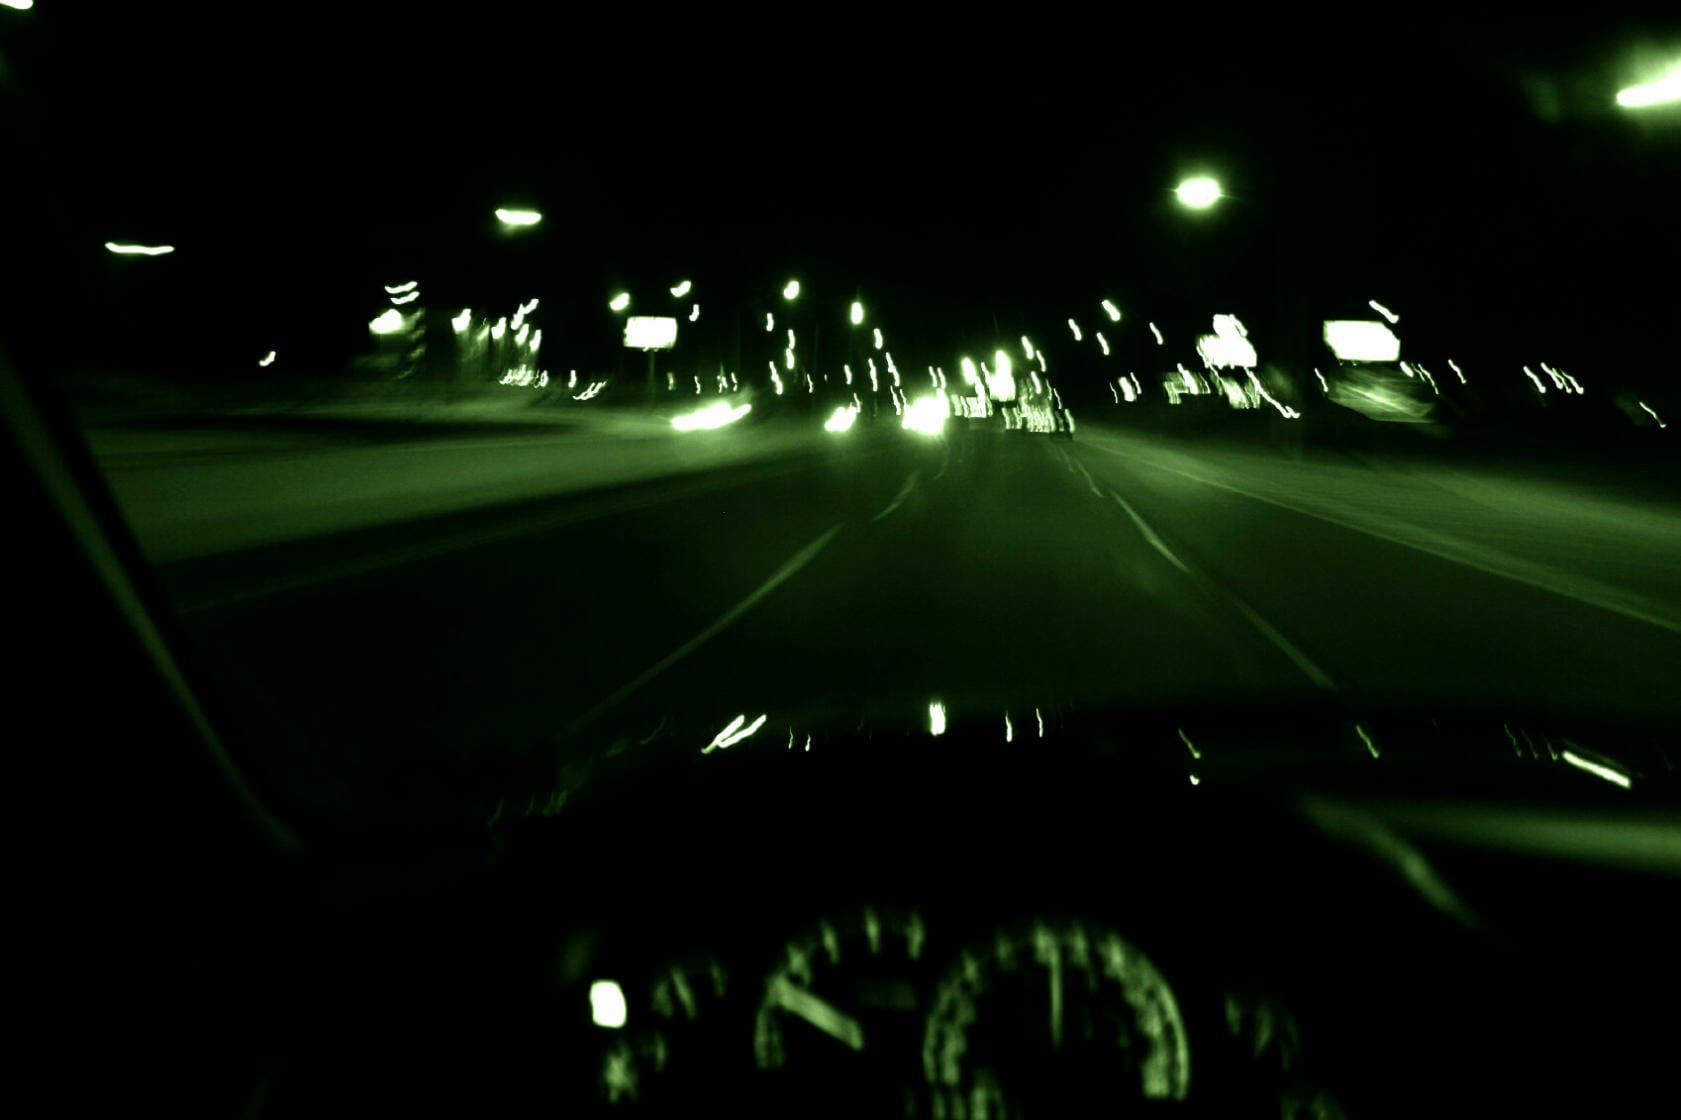 Blurry green tint image of driving